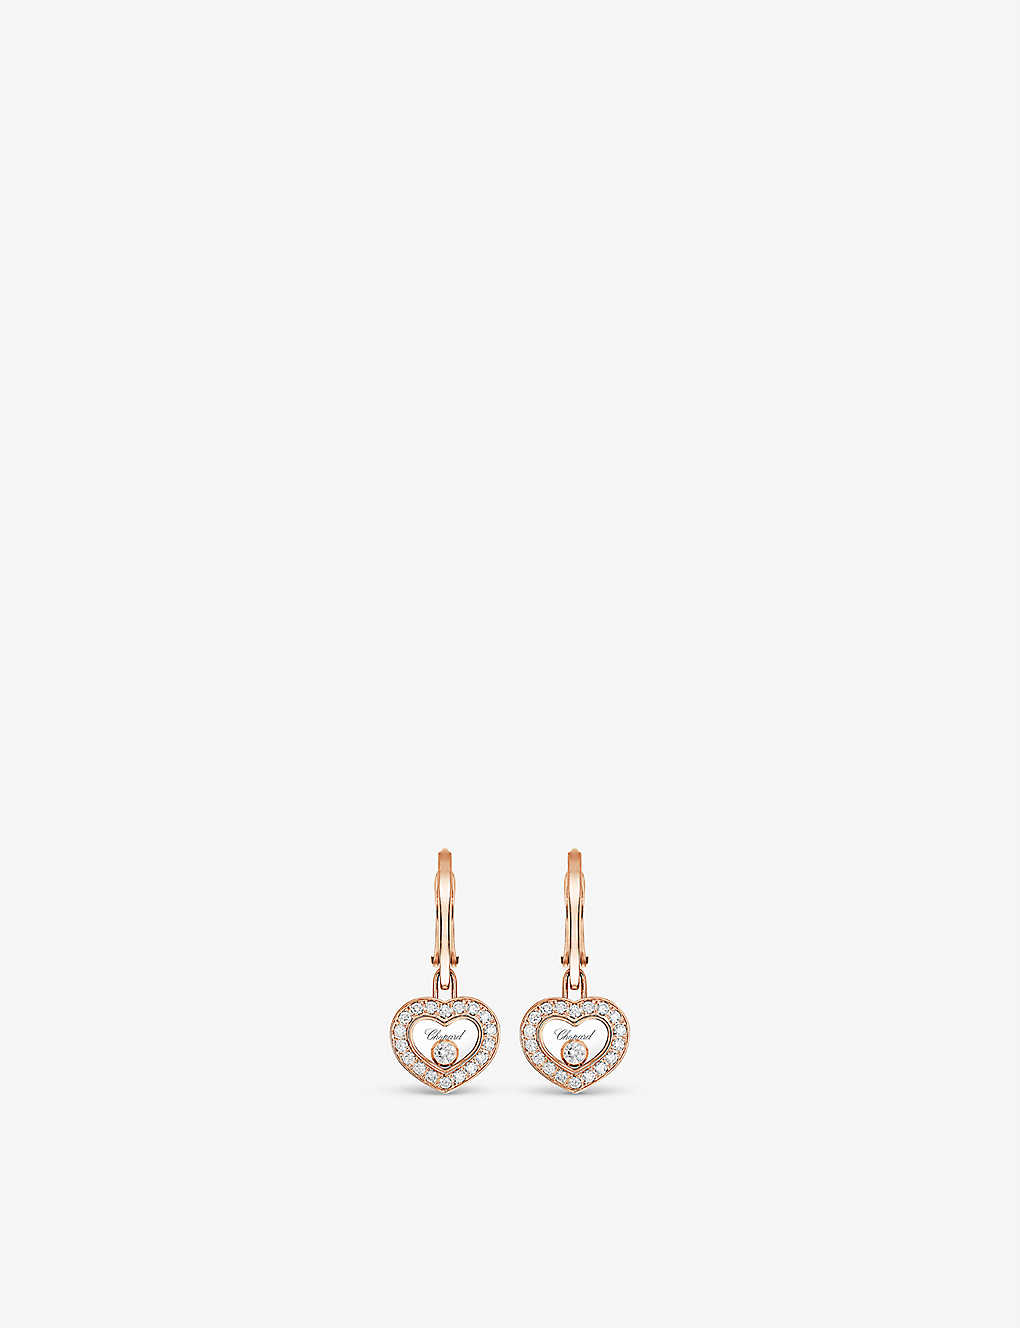 Chopard Happy Diamonds 18ct Rose Gold And 0.38ct Diamond Earrings In 18-carat Rose Gold